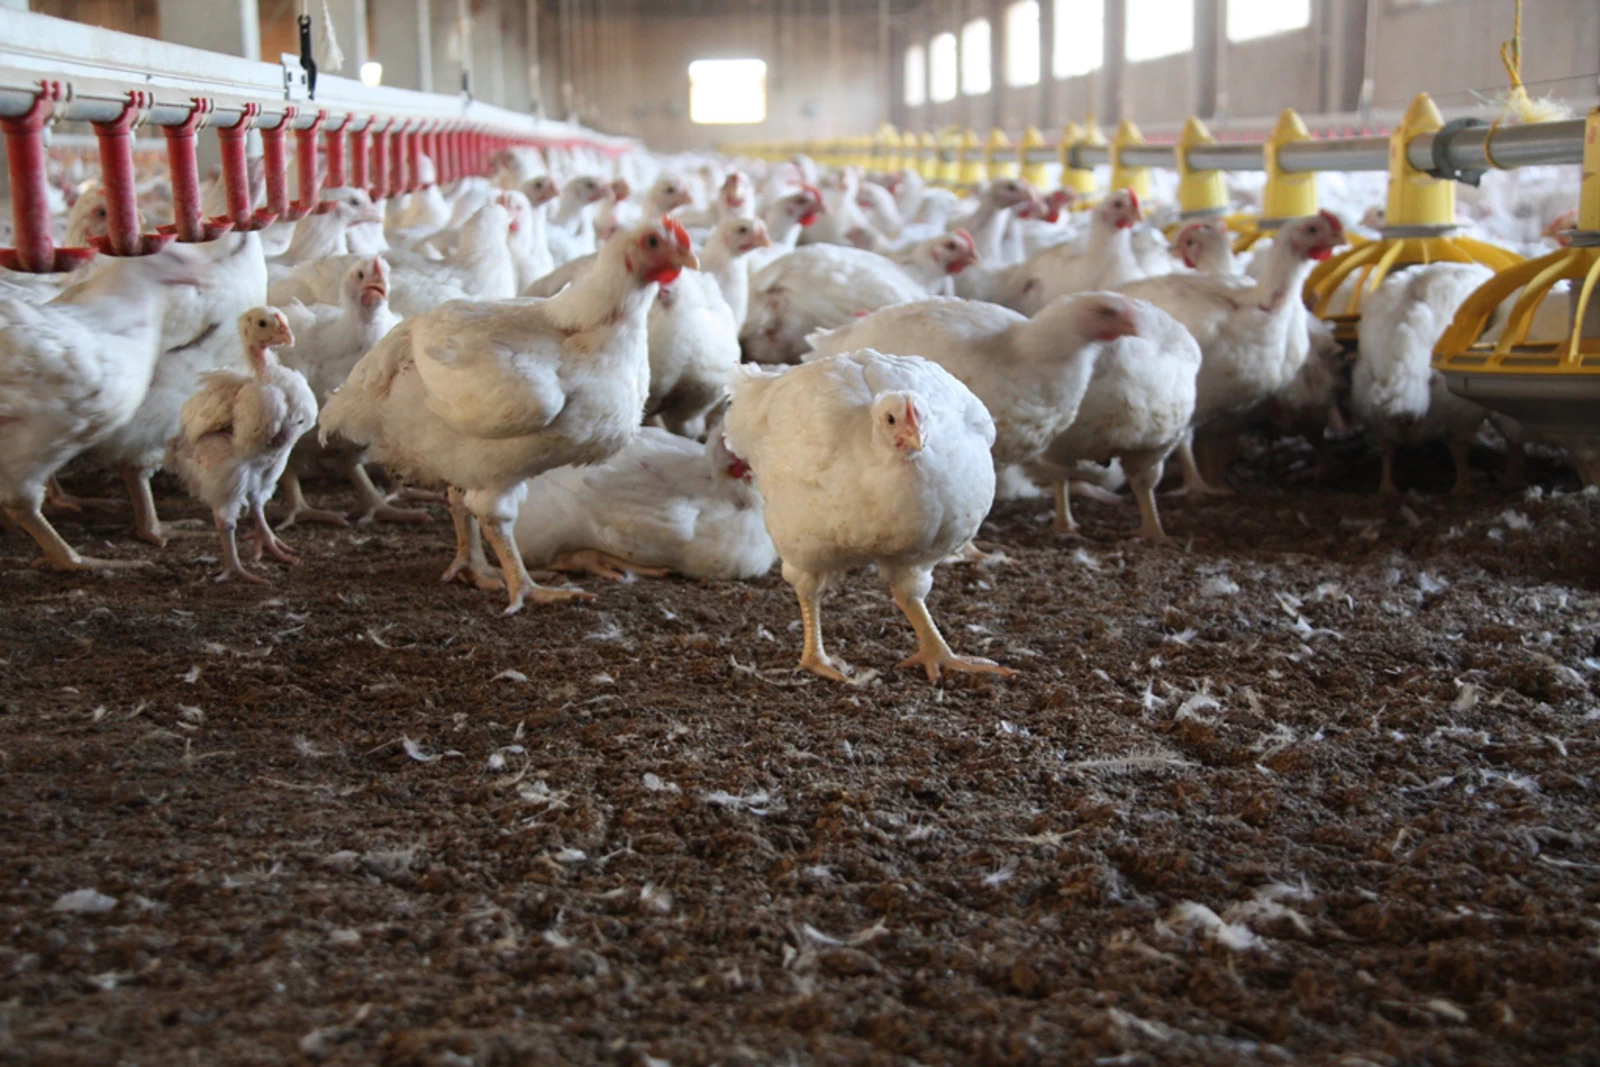 False myths about chicken meat